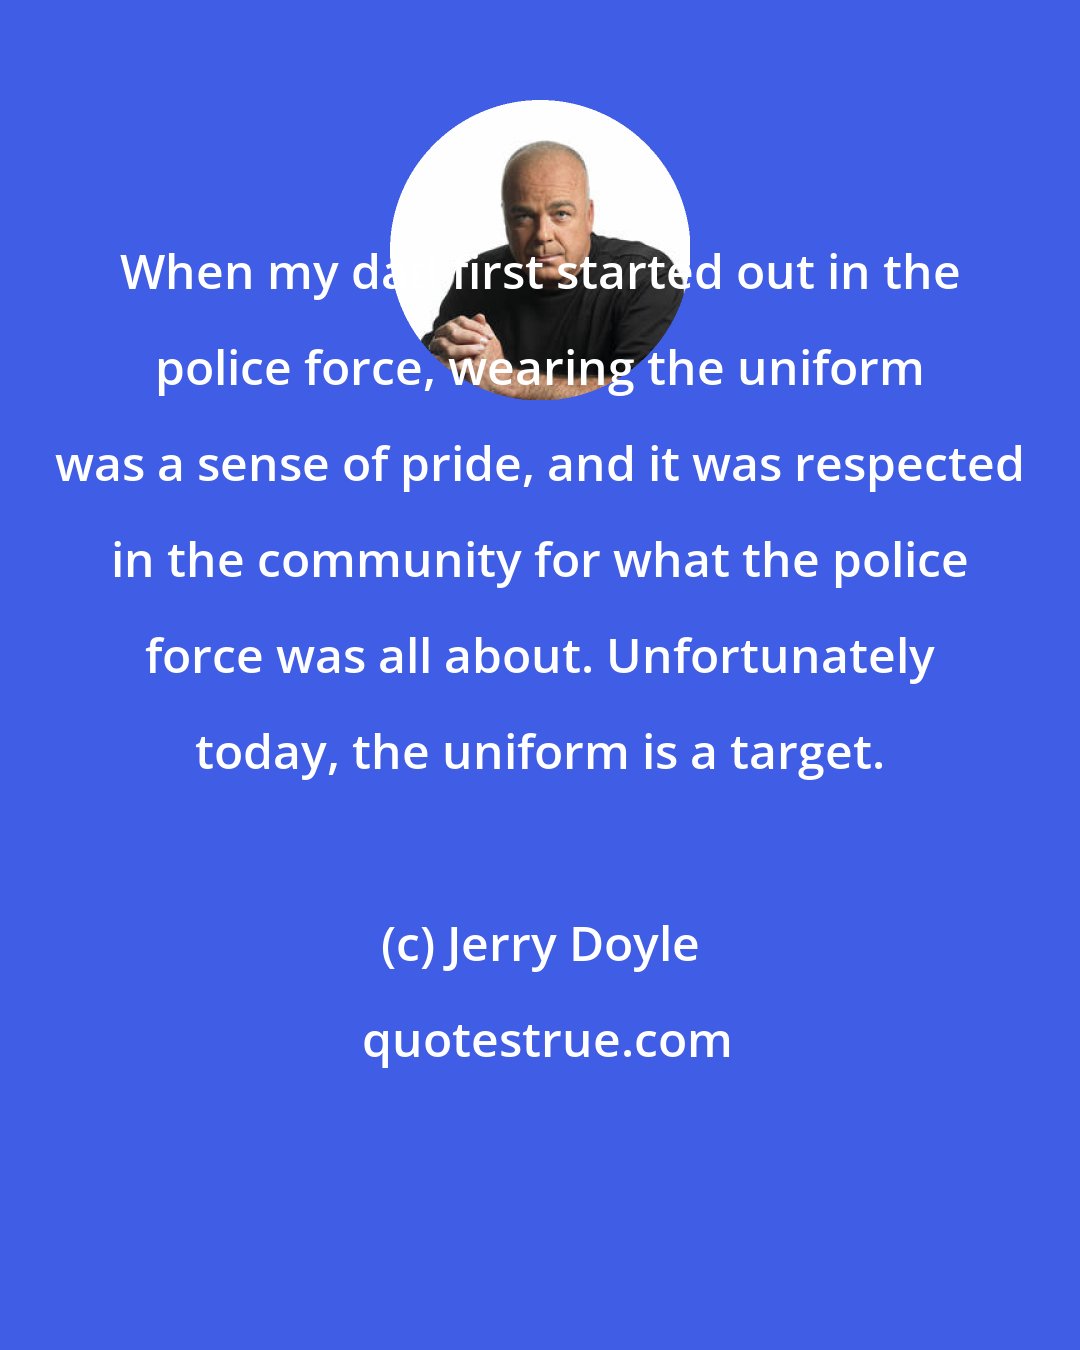 Jerry Doyle: When my dad first started out in the police force, wearing the uniform was a sense of pride, and it was respected in the community for what the police force was all about. Unfortunately today, the uniform is a target.